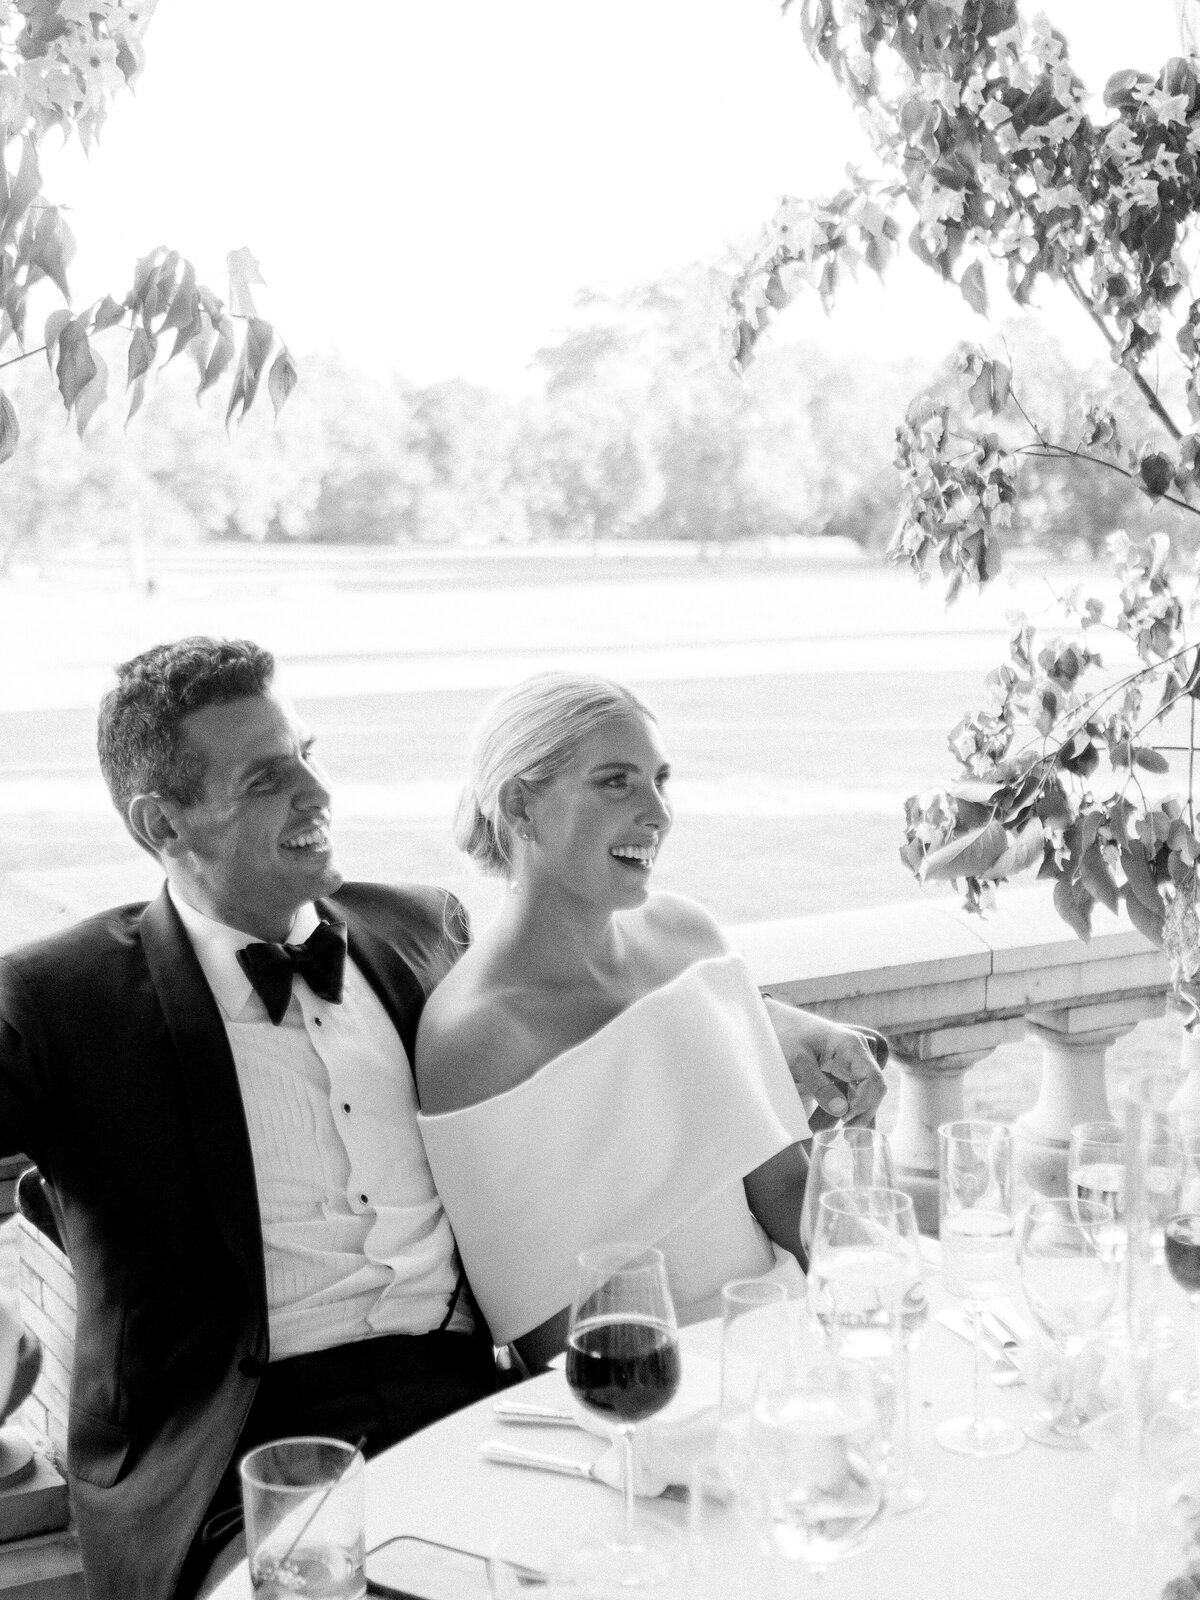 Liz Andolina Photography Destination Wedding Photographer in Italy, New York, Across the East Coast Editorial, heritage-quality images for stylish couples MK & Achille-Liz Andolina Photography-950